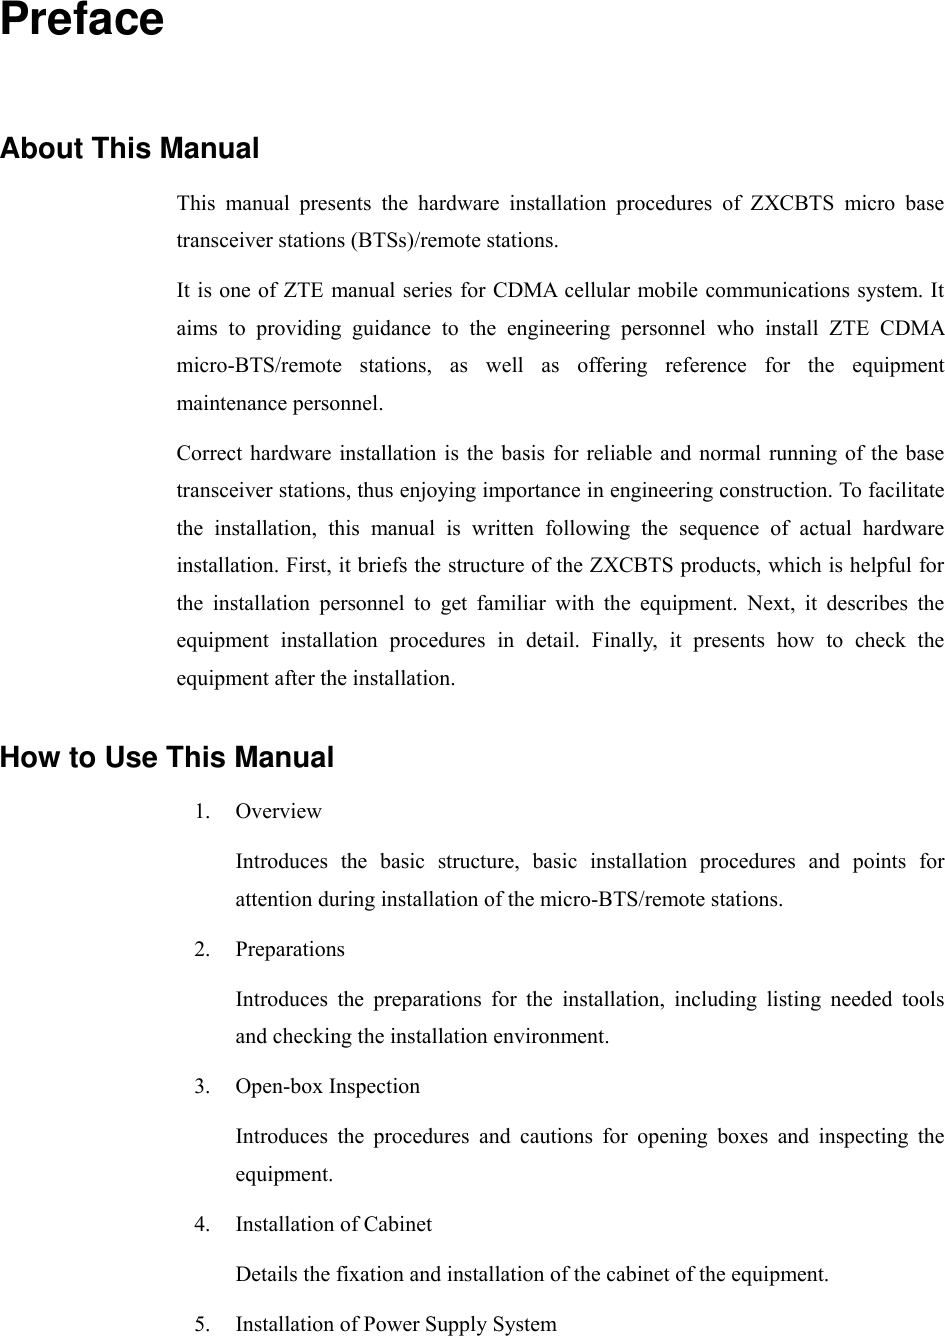  Preface About This Manual This manual presents the hardware installation procedures of ZXCBTS micro base transceiver stations (BTSs)/remote stations. It is one of ZTE manual series for CDMA cellular mobile communications system. It aims to providing guidance to the engineering personnel who install ZTE CDMA micro-BTS/remote stations, as well as offering reference for the equipment maintenance personnel. Correct hardware installation is the basis for reliable and normal running of the base transceiver stations, thus enjoying importance in engineering construction. To facilitate the installation, this manual is written following the sequence of actual hardware installation. First, it briefs the structure of the ZXCBTS products, which is helpful for the installation personnel to get familiar with the equipment. Next, it describes the equipment installation procedures in detail. Finally, it presents how to check the equipment after the installation. How to Use This Manual 1. Overview Introduces the basic structure, basic installation procedures and points for attention during installation of the micro-BTS/remote stations. 2. Preparations Introduces the preparations for the installation, including listing needed tools and checking the installation environment. 3. Open-box Inspection Introduces the procedures and cautions for opening boxes and inspecting the equipment. 4.  Installation of Cabinet Details the fixation and installation of the cabinet of the equipment. 5.  Installation of Power Supply System 